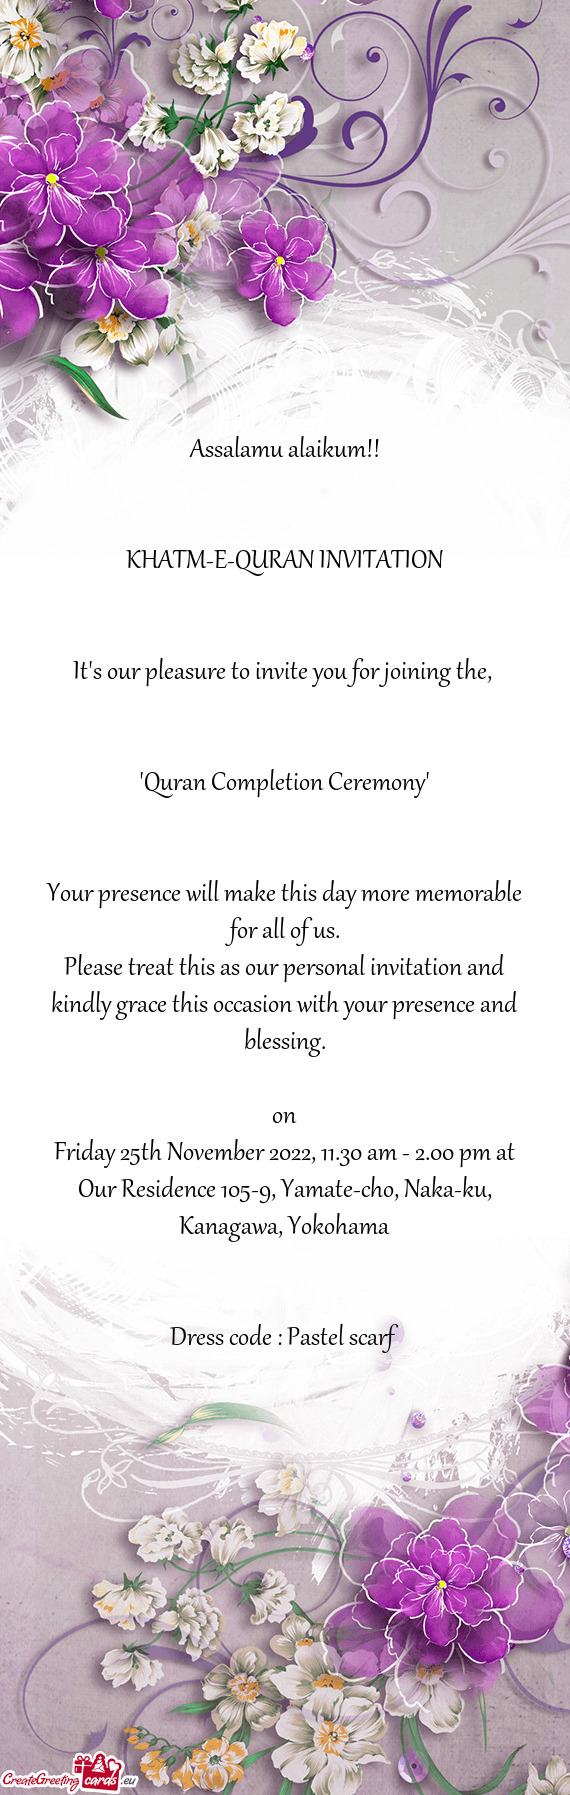 "Quran Completion Ceremony"